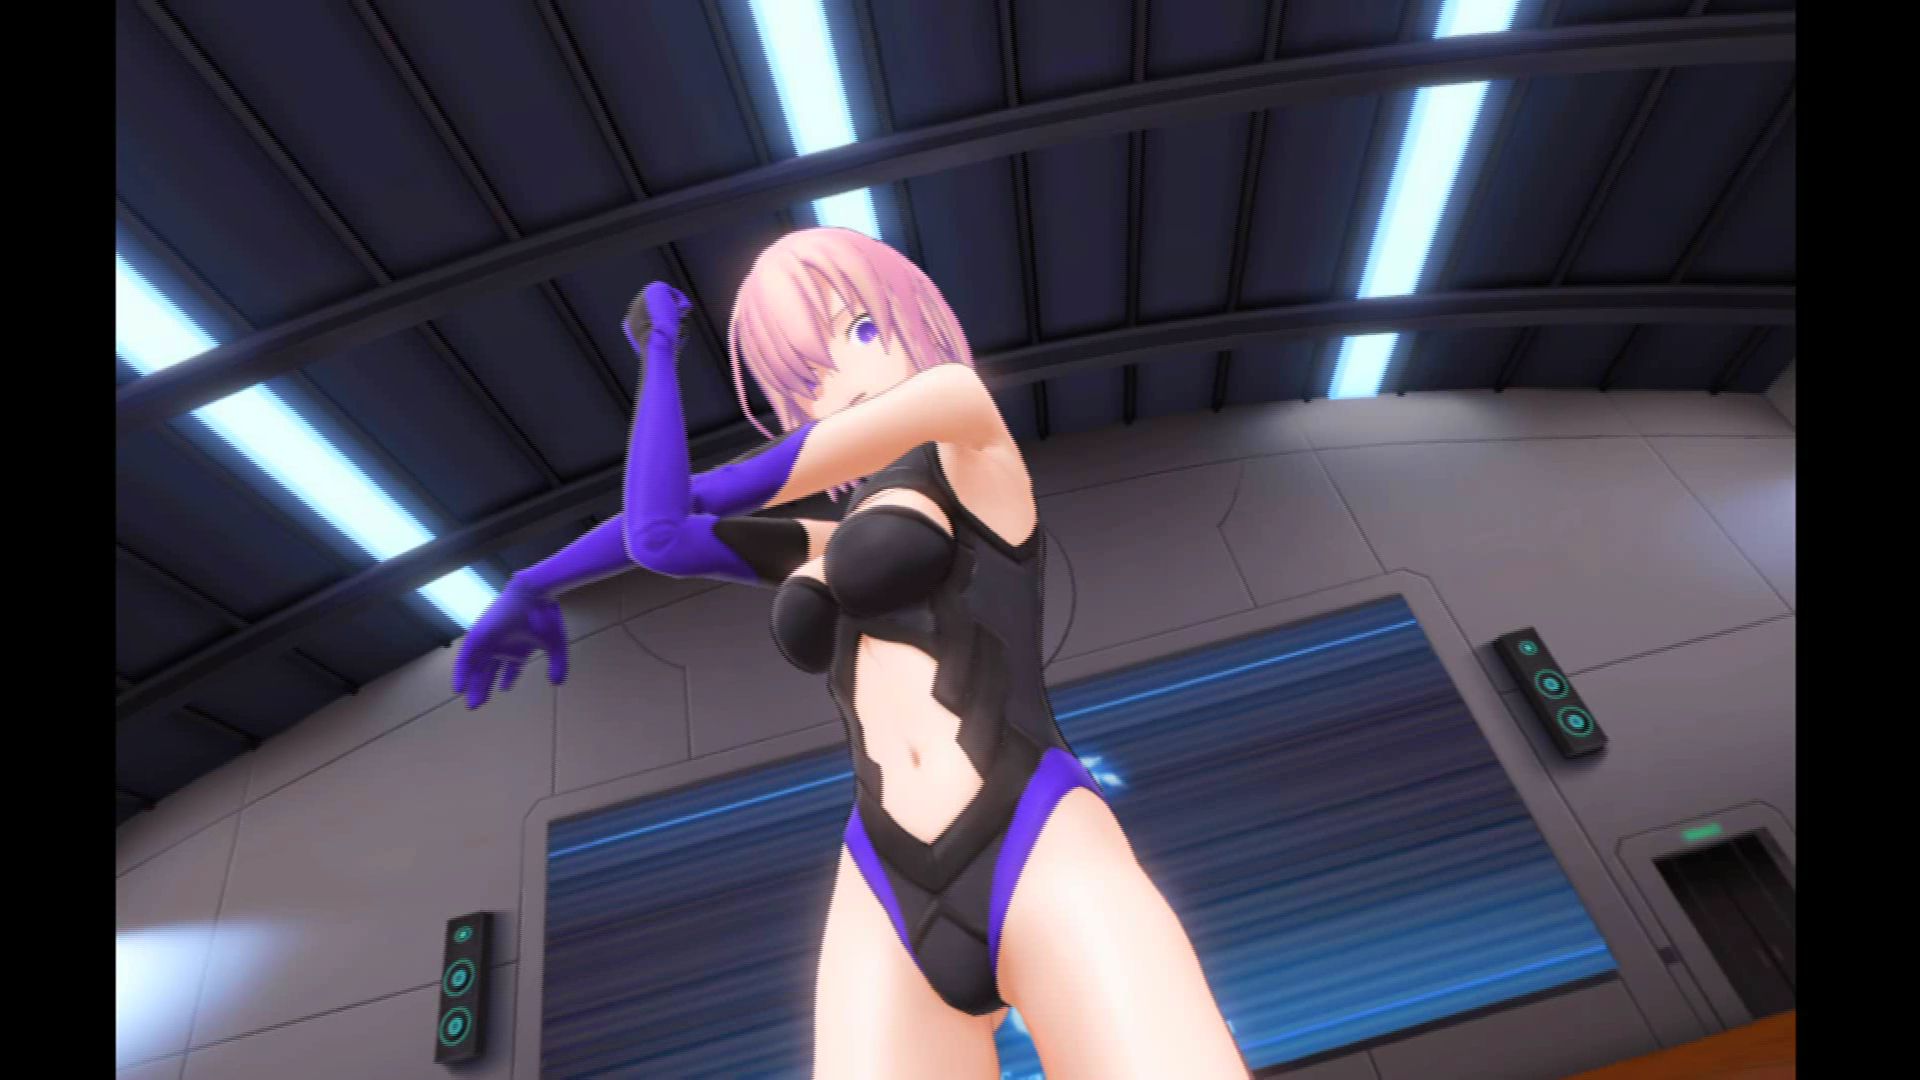 [Fate/Grand order VR] Maschsee underwear and breast! The underwear of the alto rear, too! 12